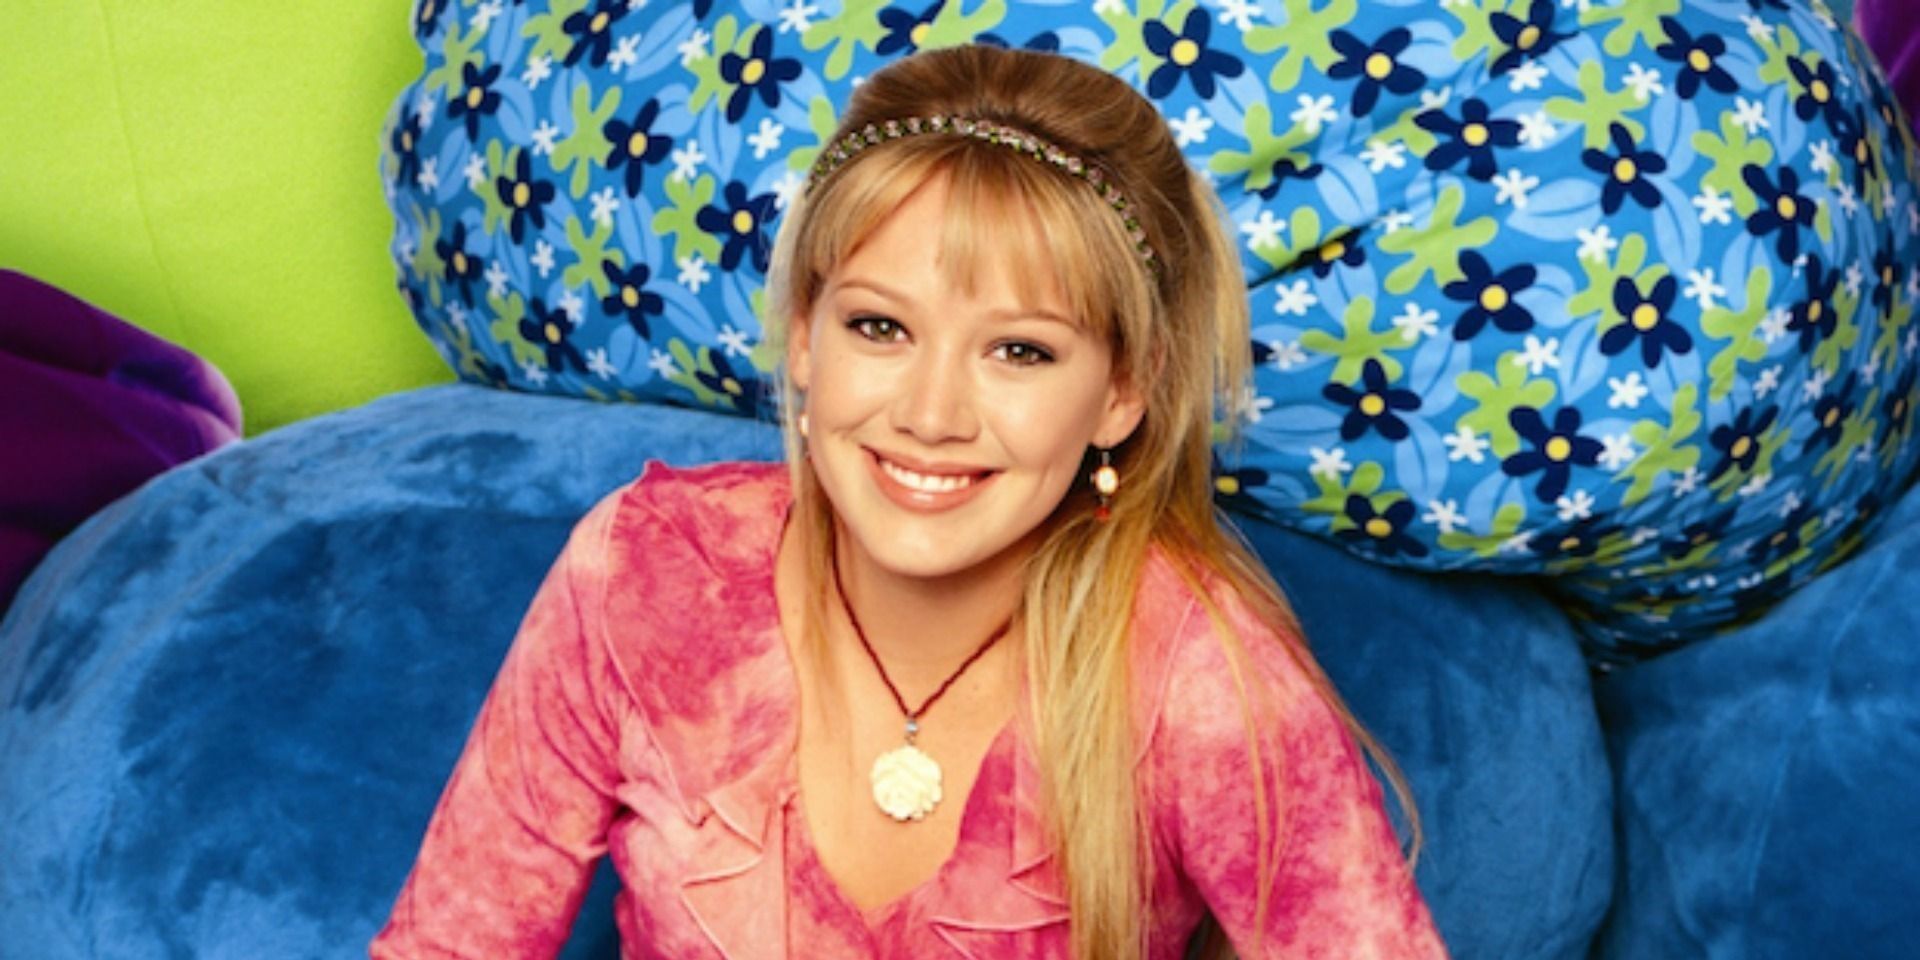 Hilary Duff smiling as Lizzie McGuire